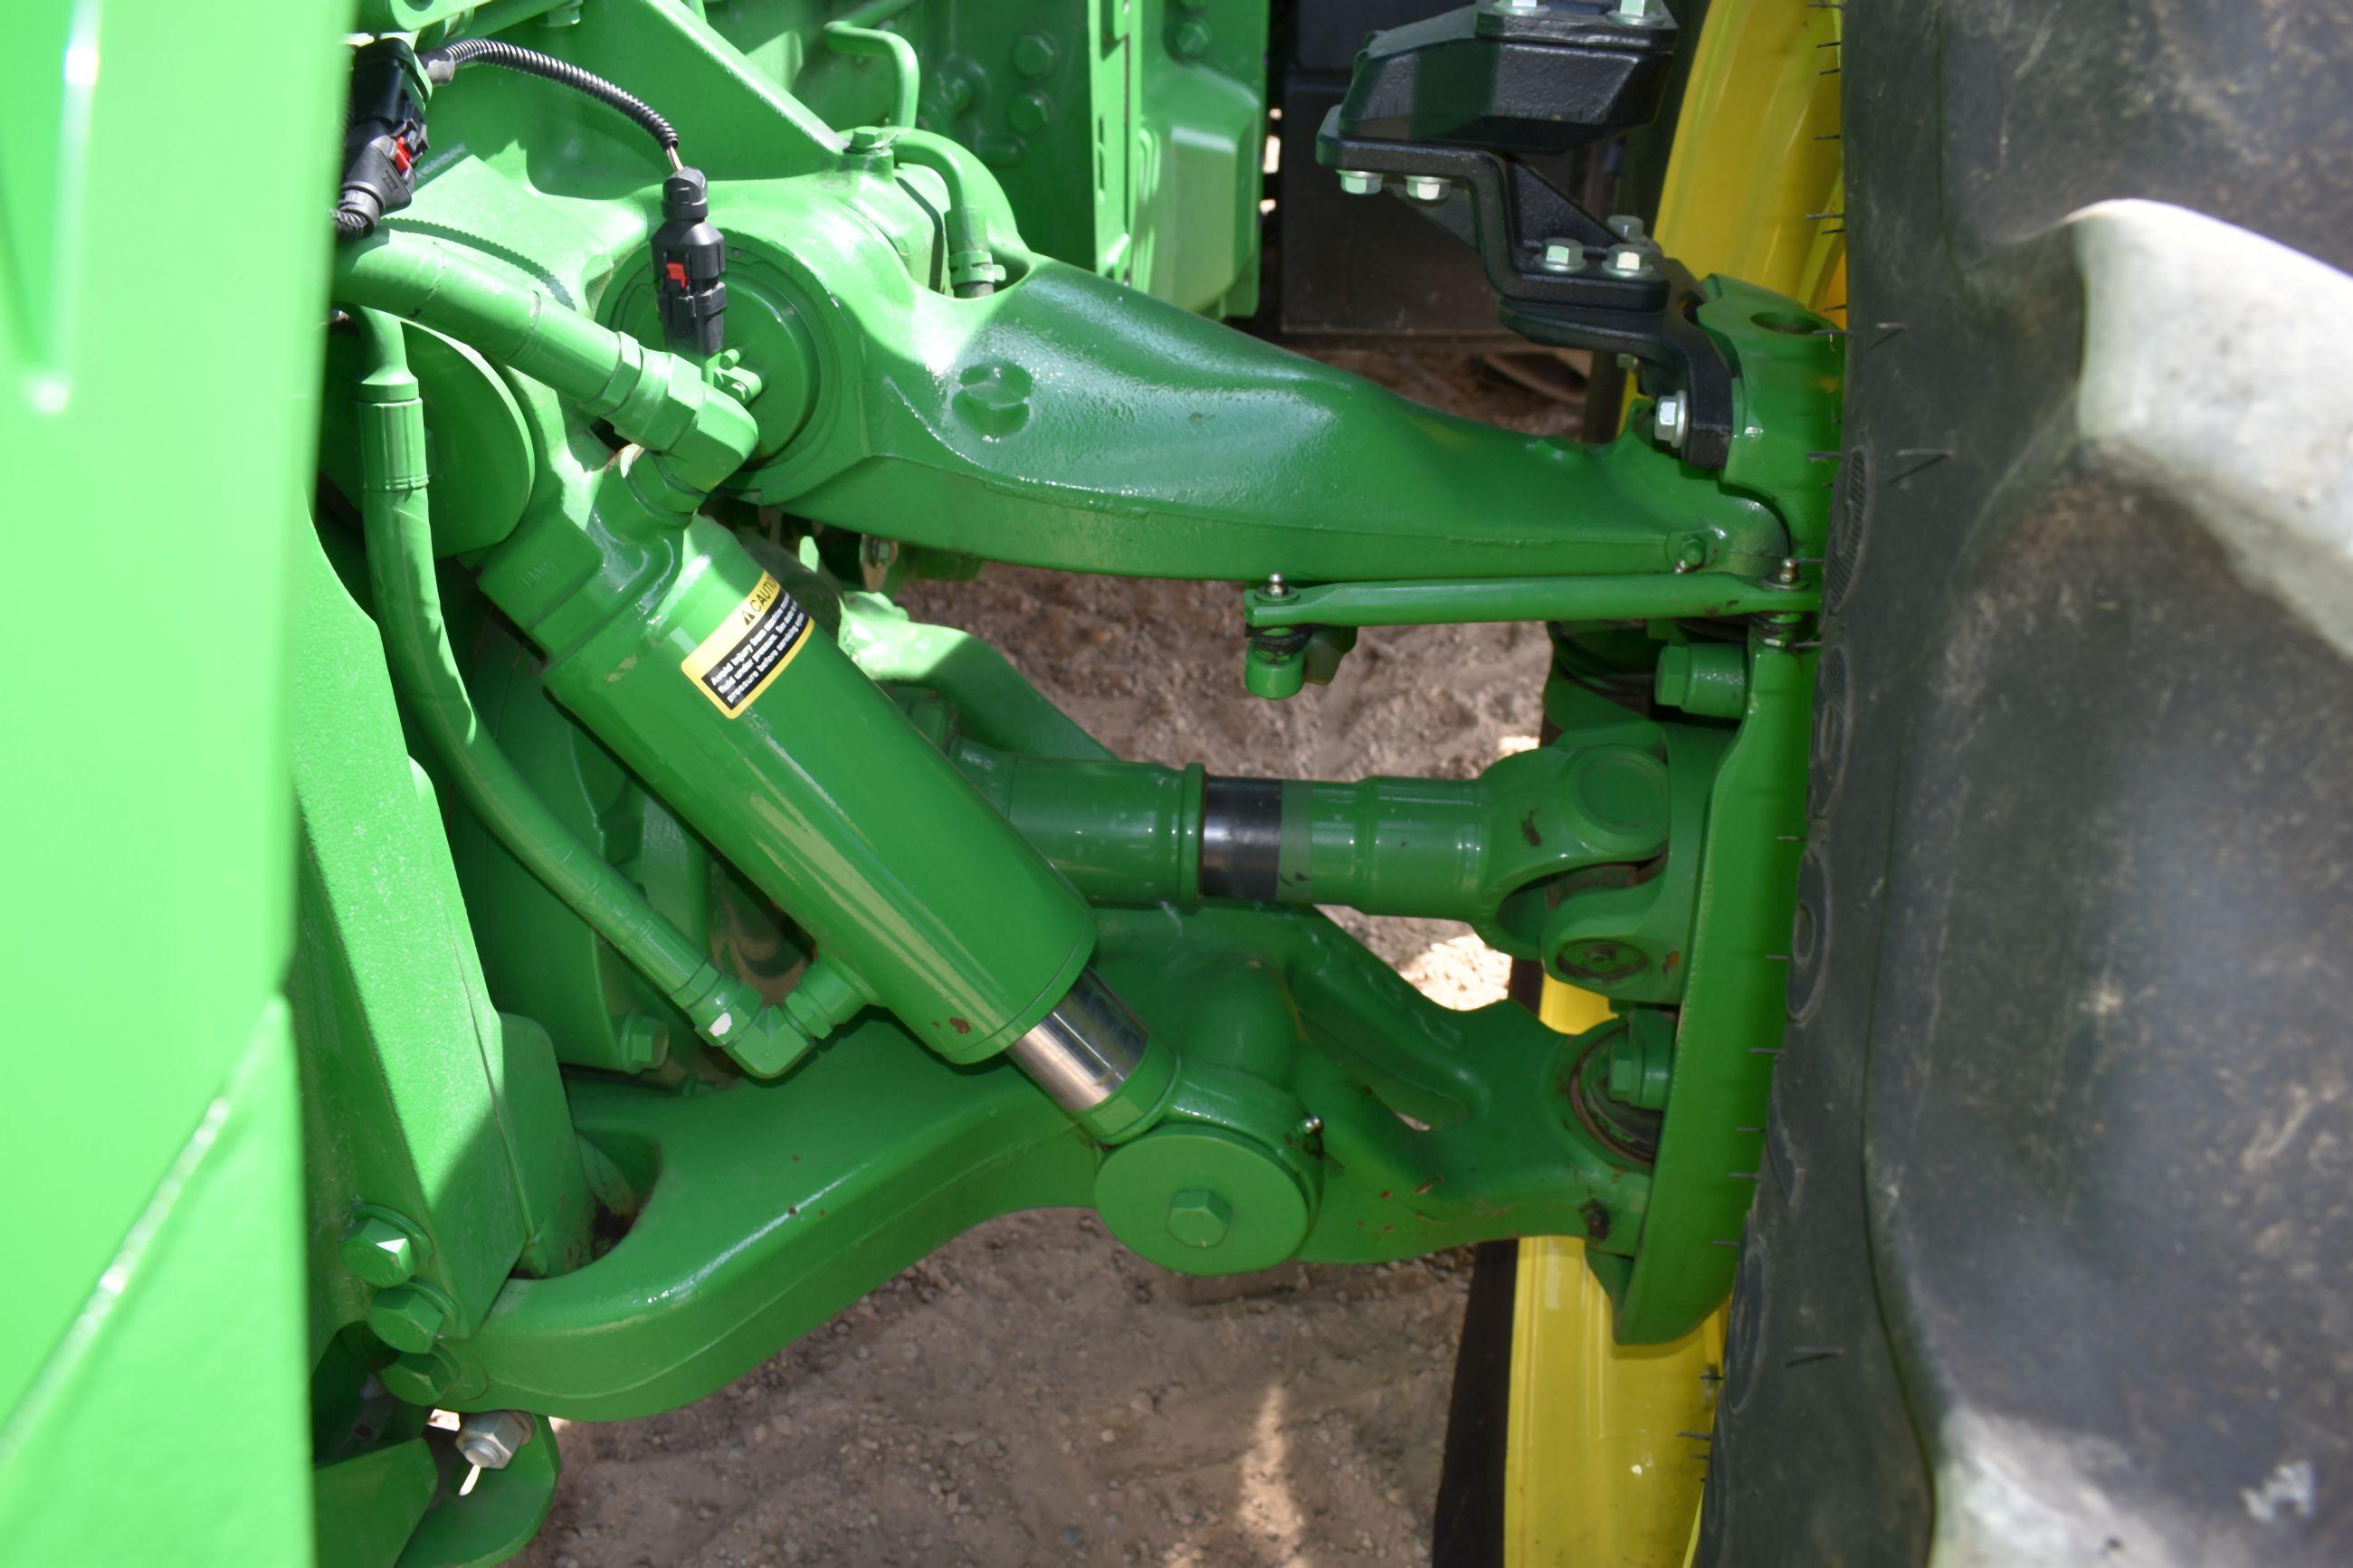 2014 John Deere 8270R MFWD Tractor, 232 Actual One Owner Hours, ILS, IVT, 480/80R50 Rear Duals, 380/